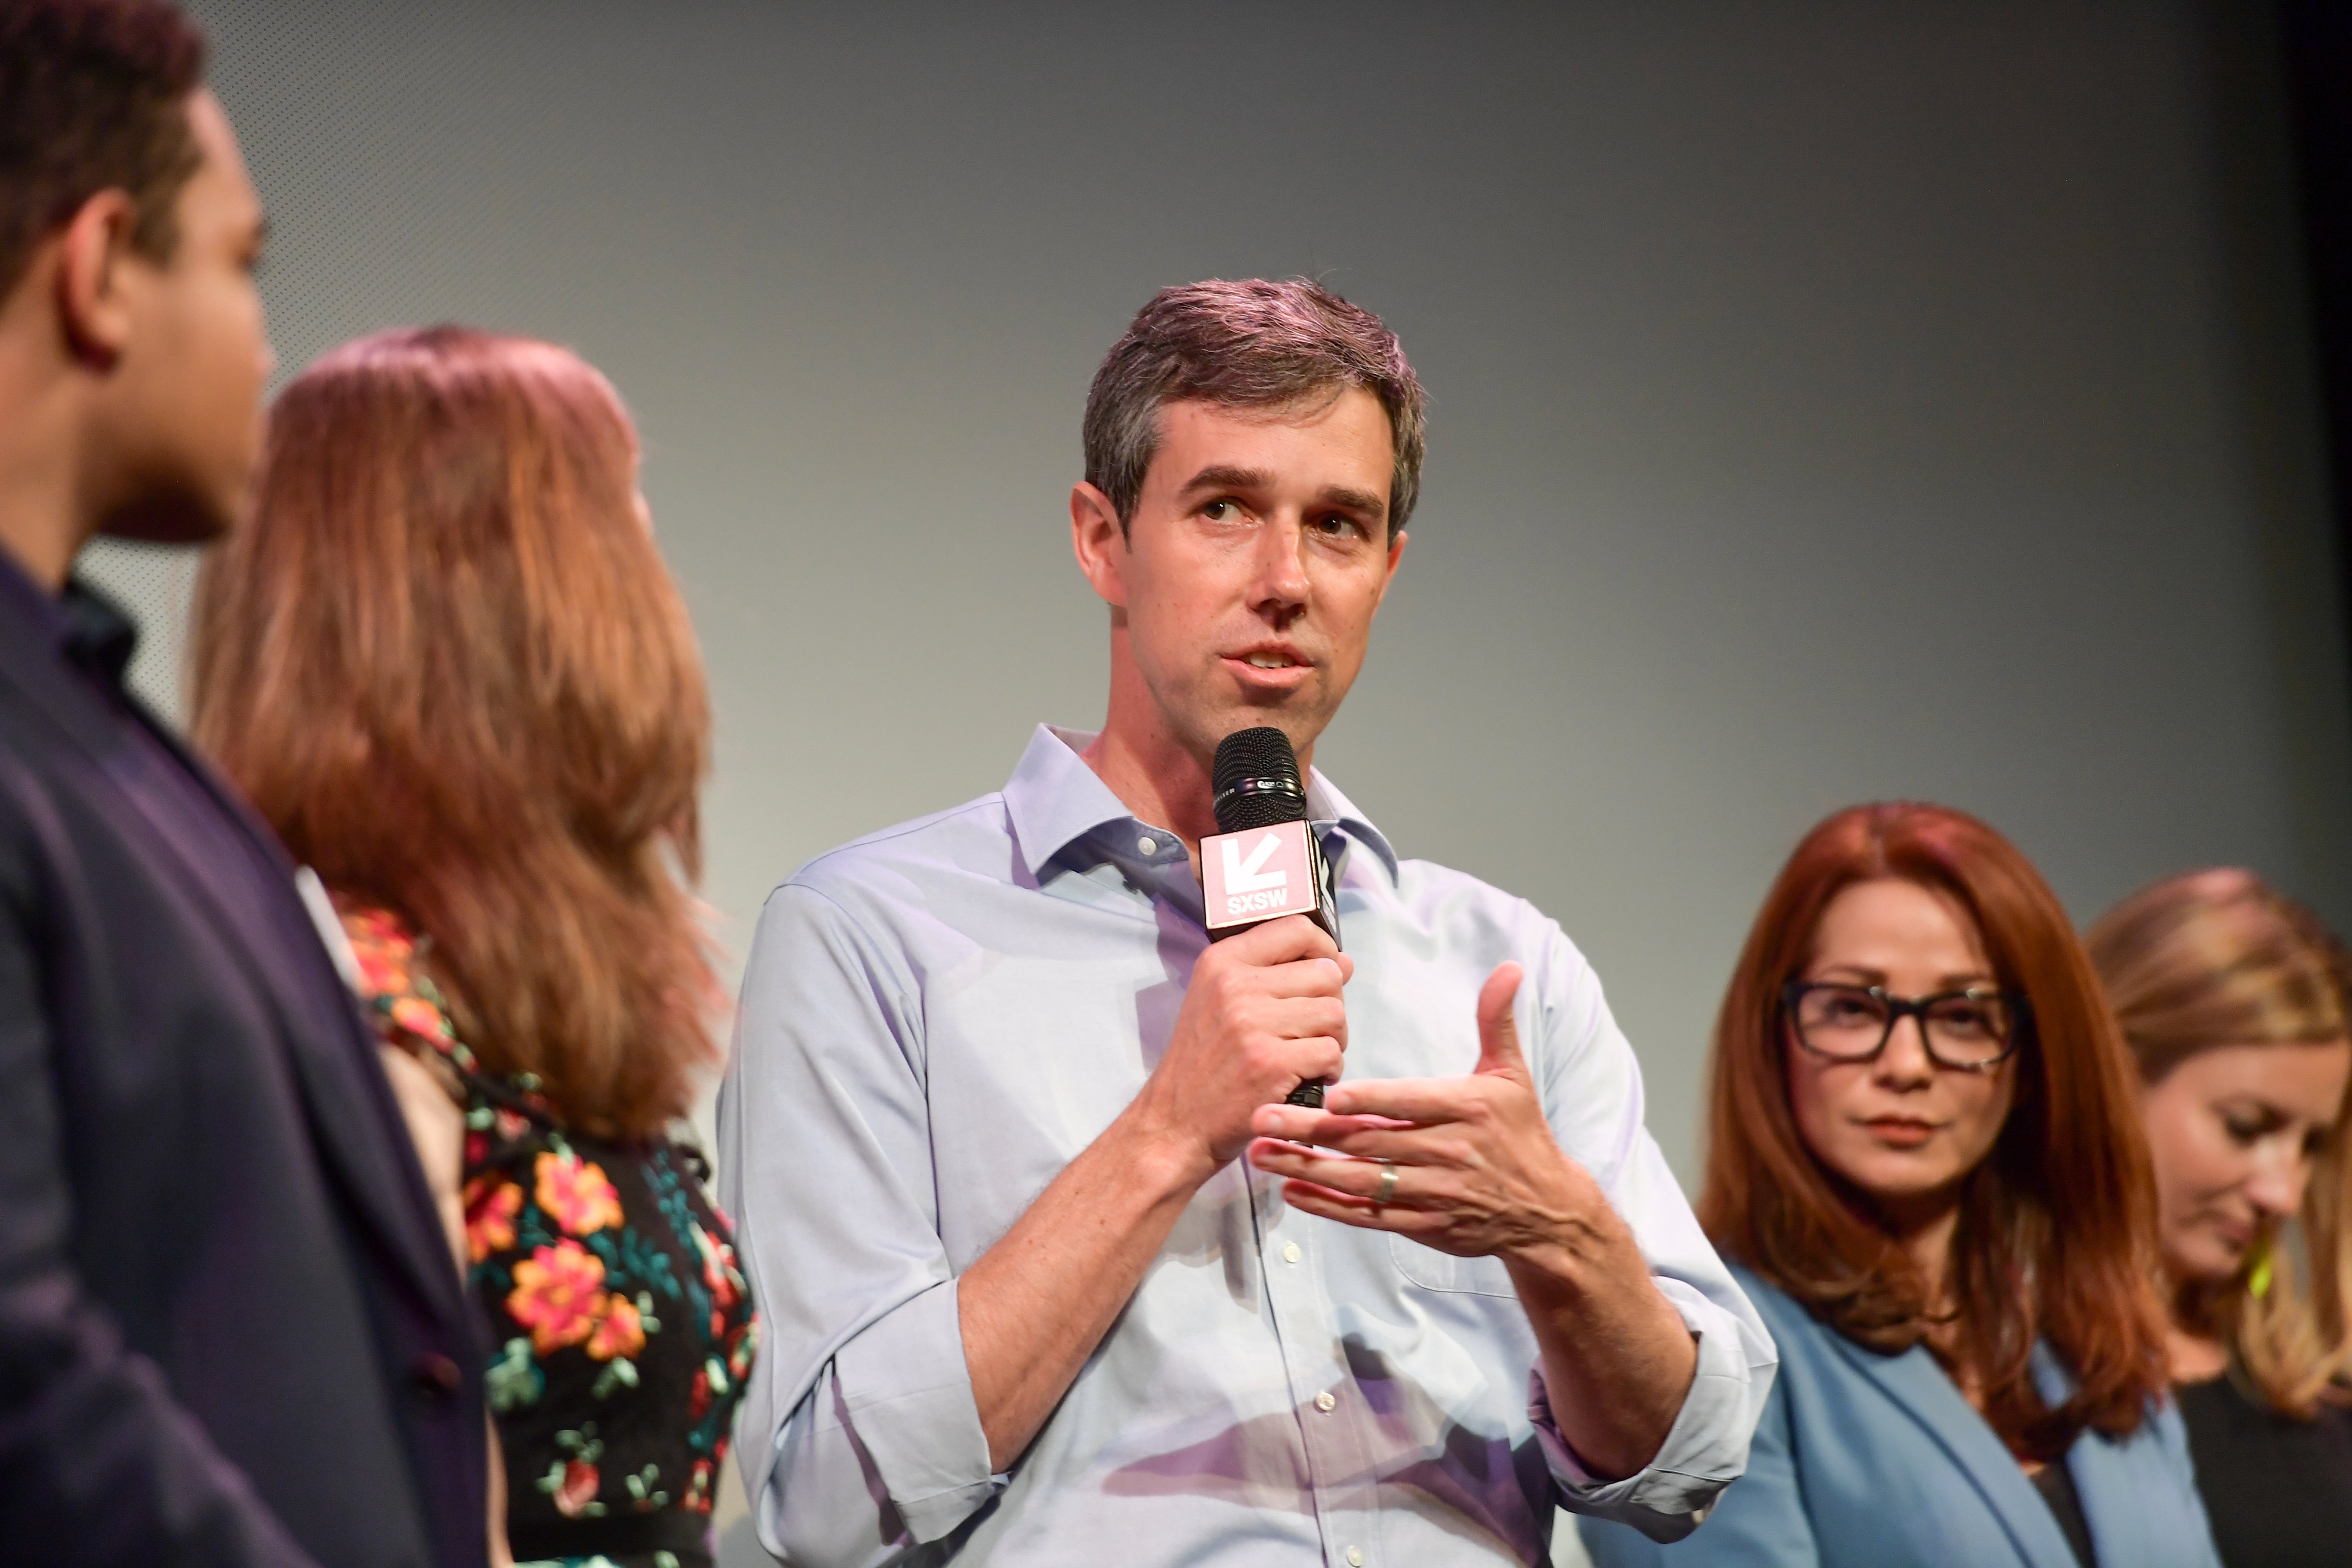 Beto O'Rourke attends the "Running with Beto" Premiere 2019 SXSW Conference and Festivals at Paramount Theatre on March 09, 2019 in Austin, Texas. (Matt Winkelmeyer—Getty Images)